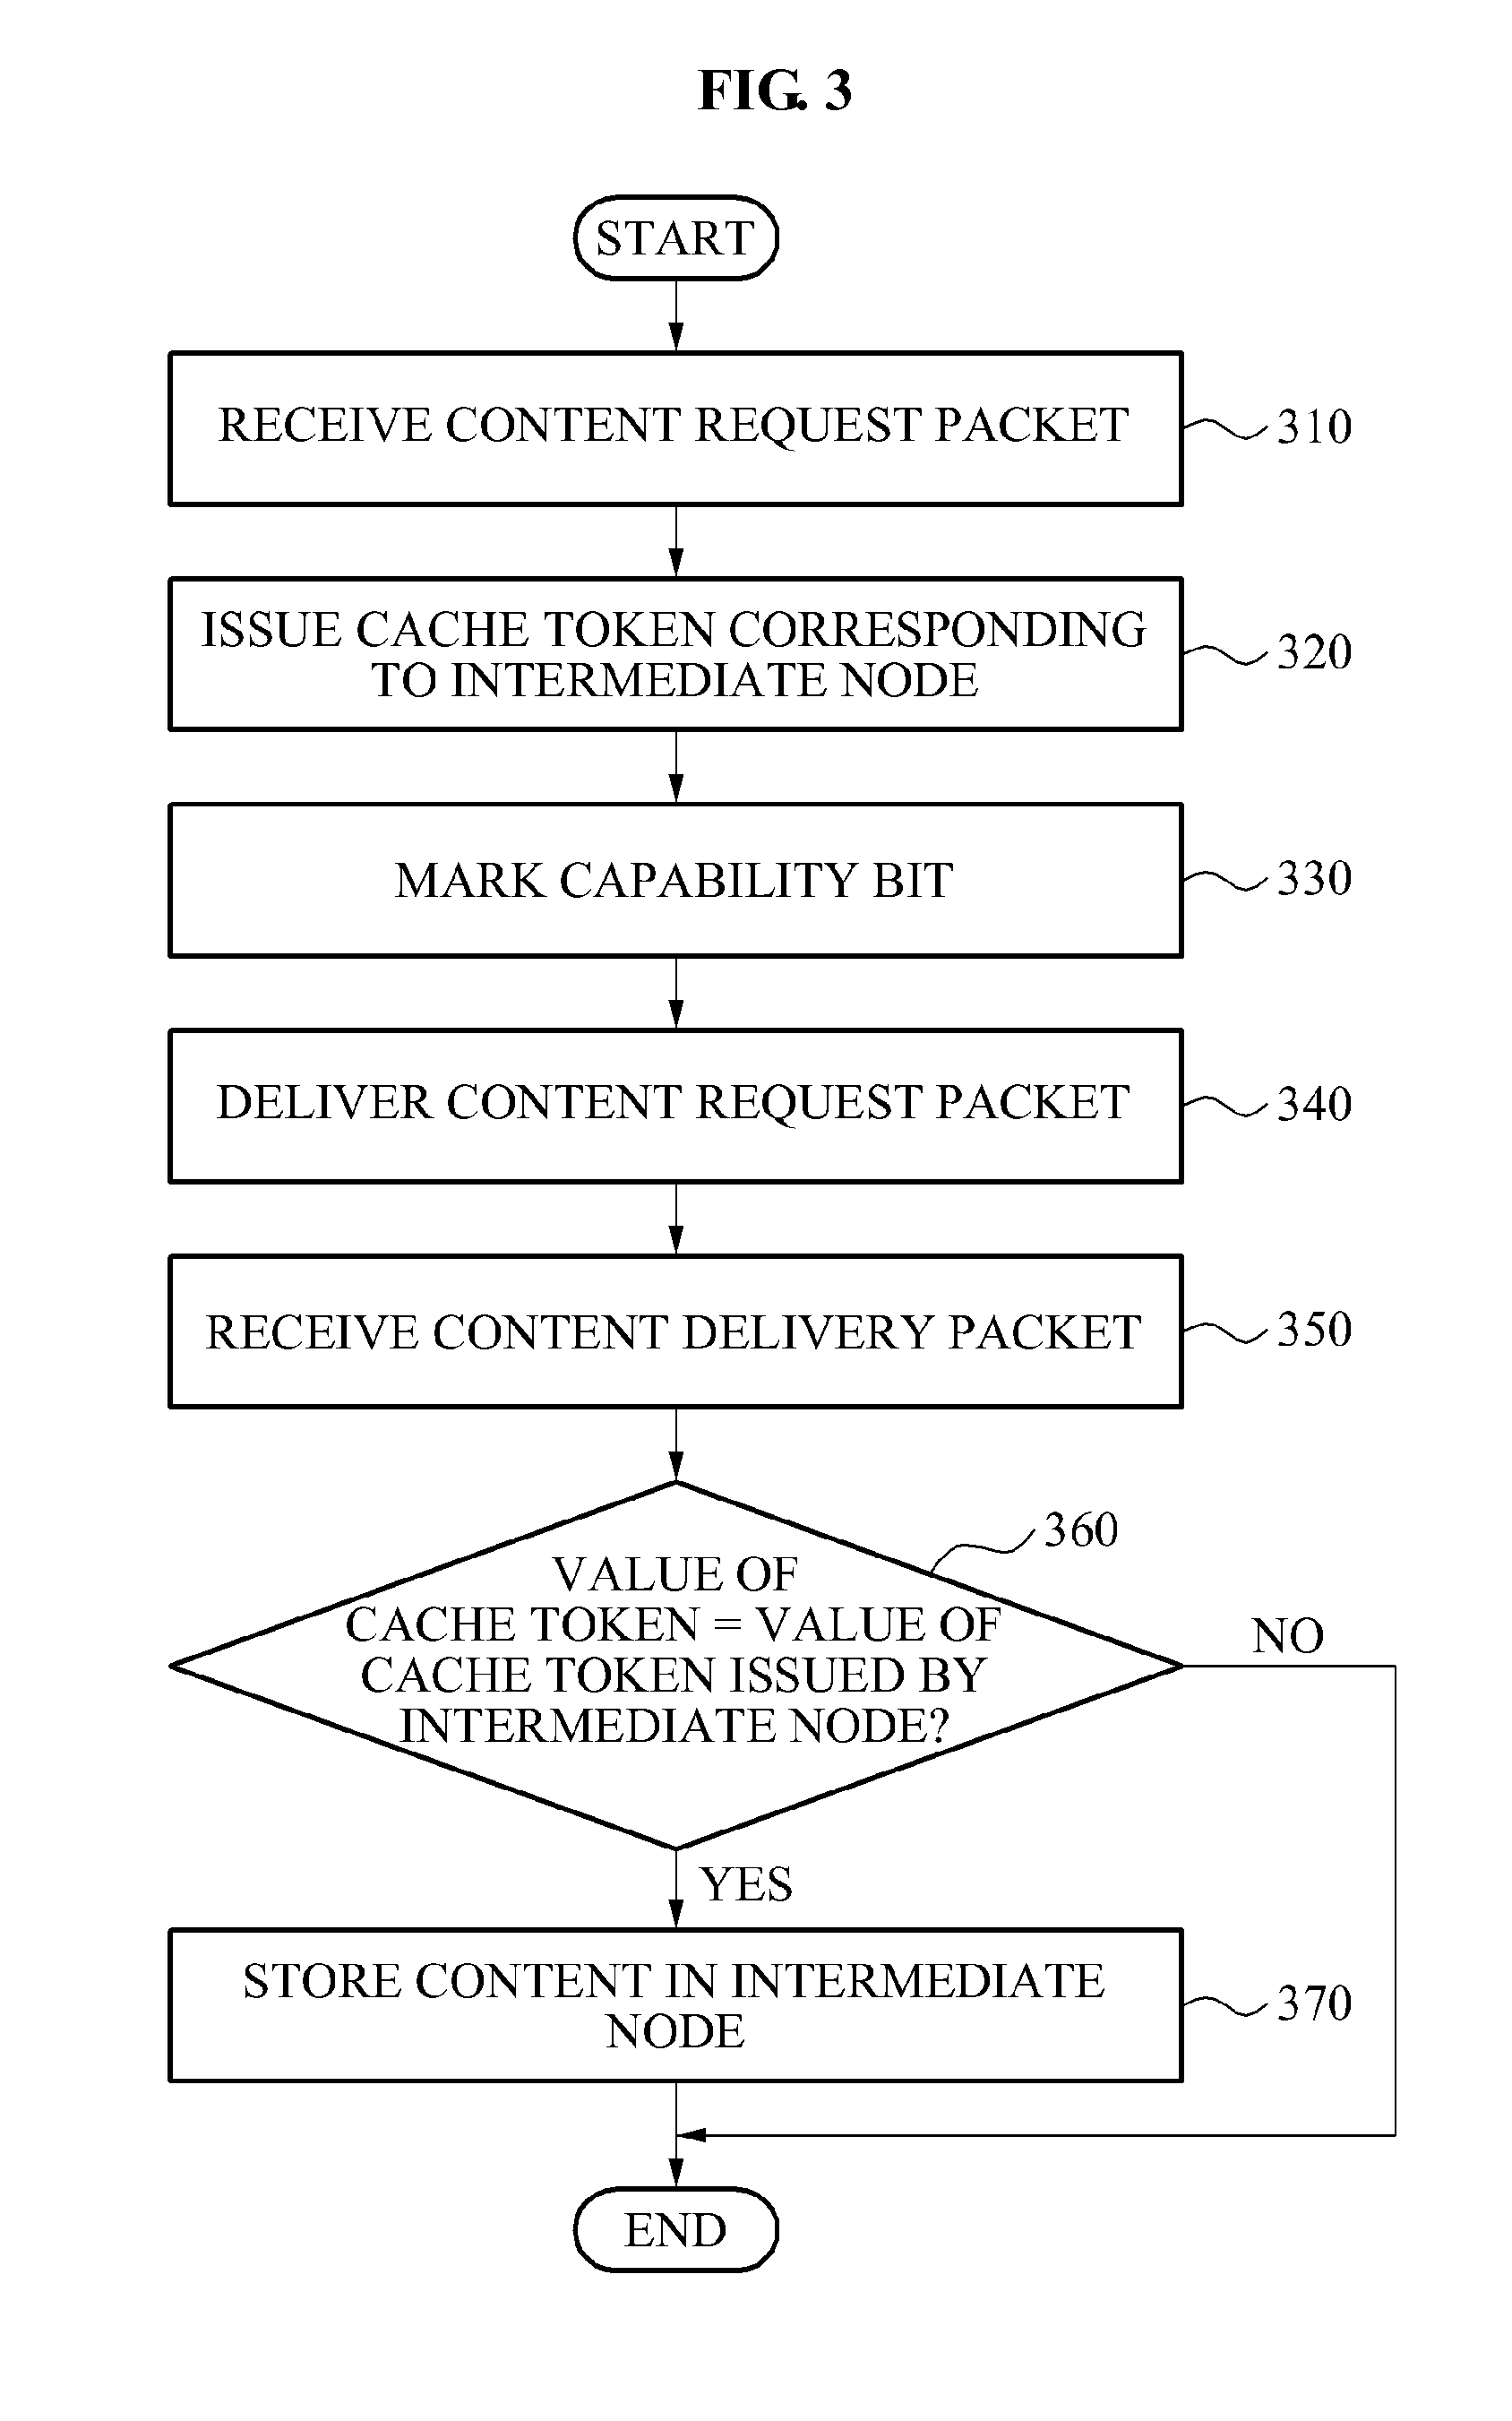 Communication method of content requester, intermediate node, and content owner in content centric network